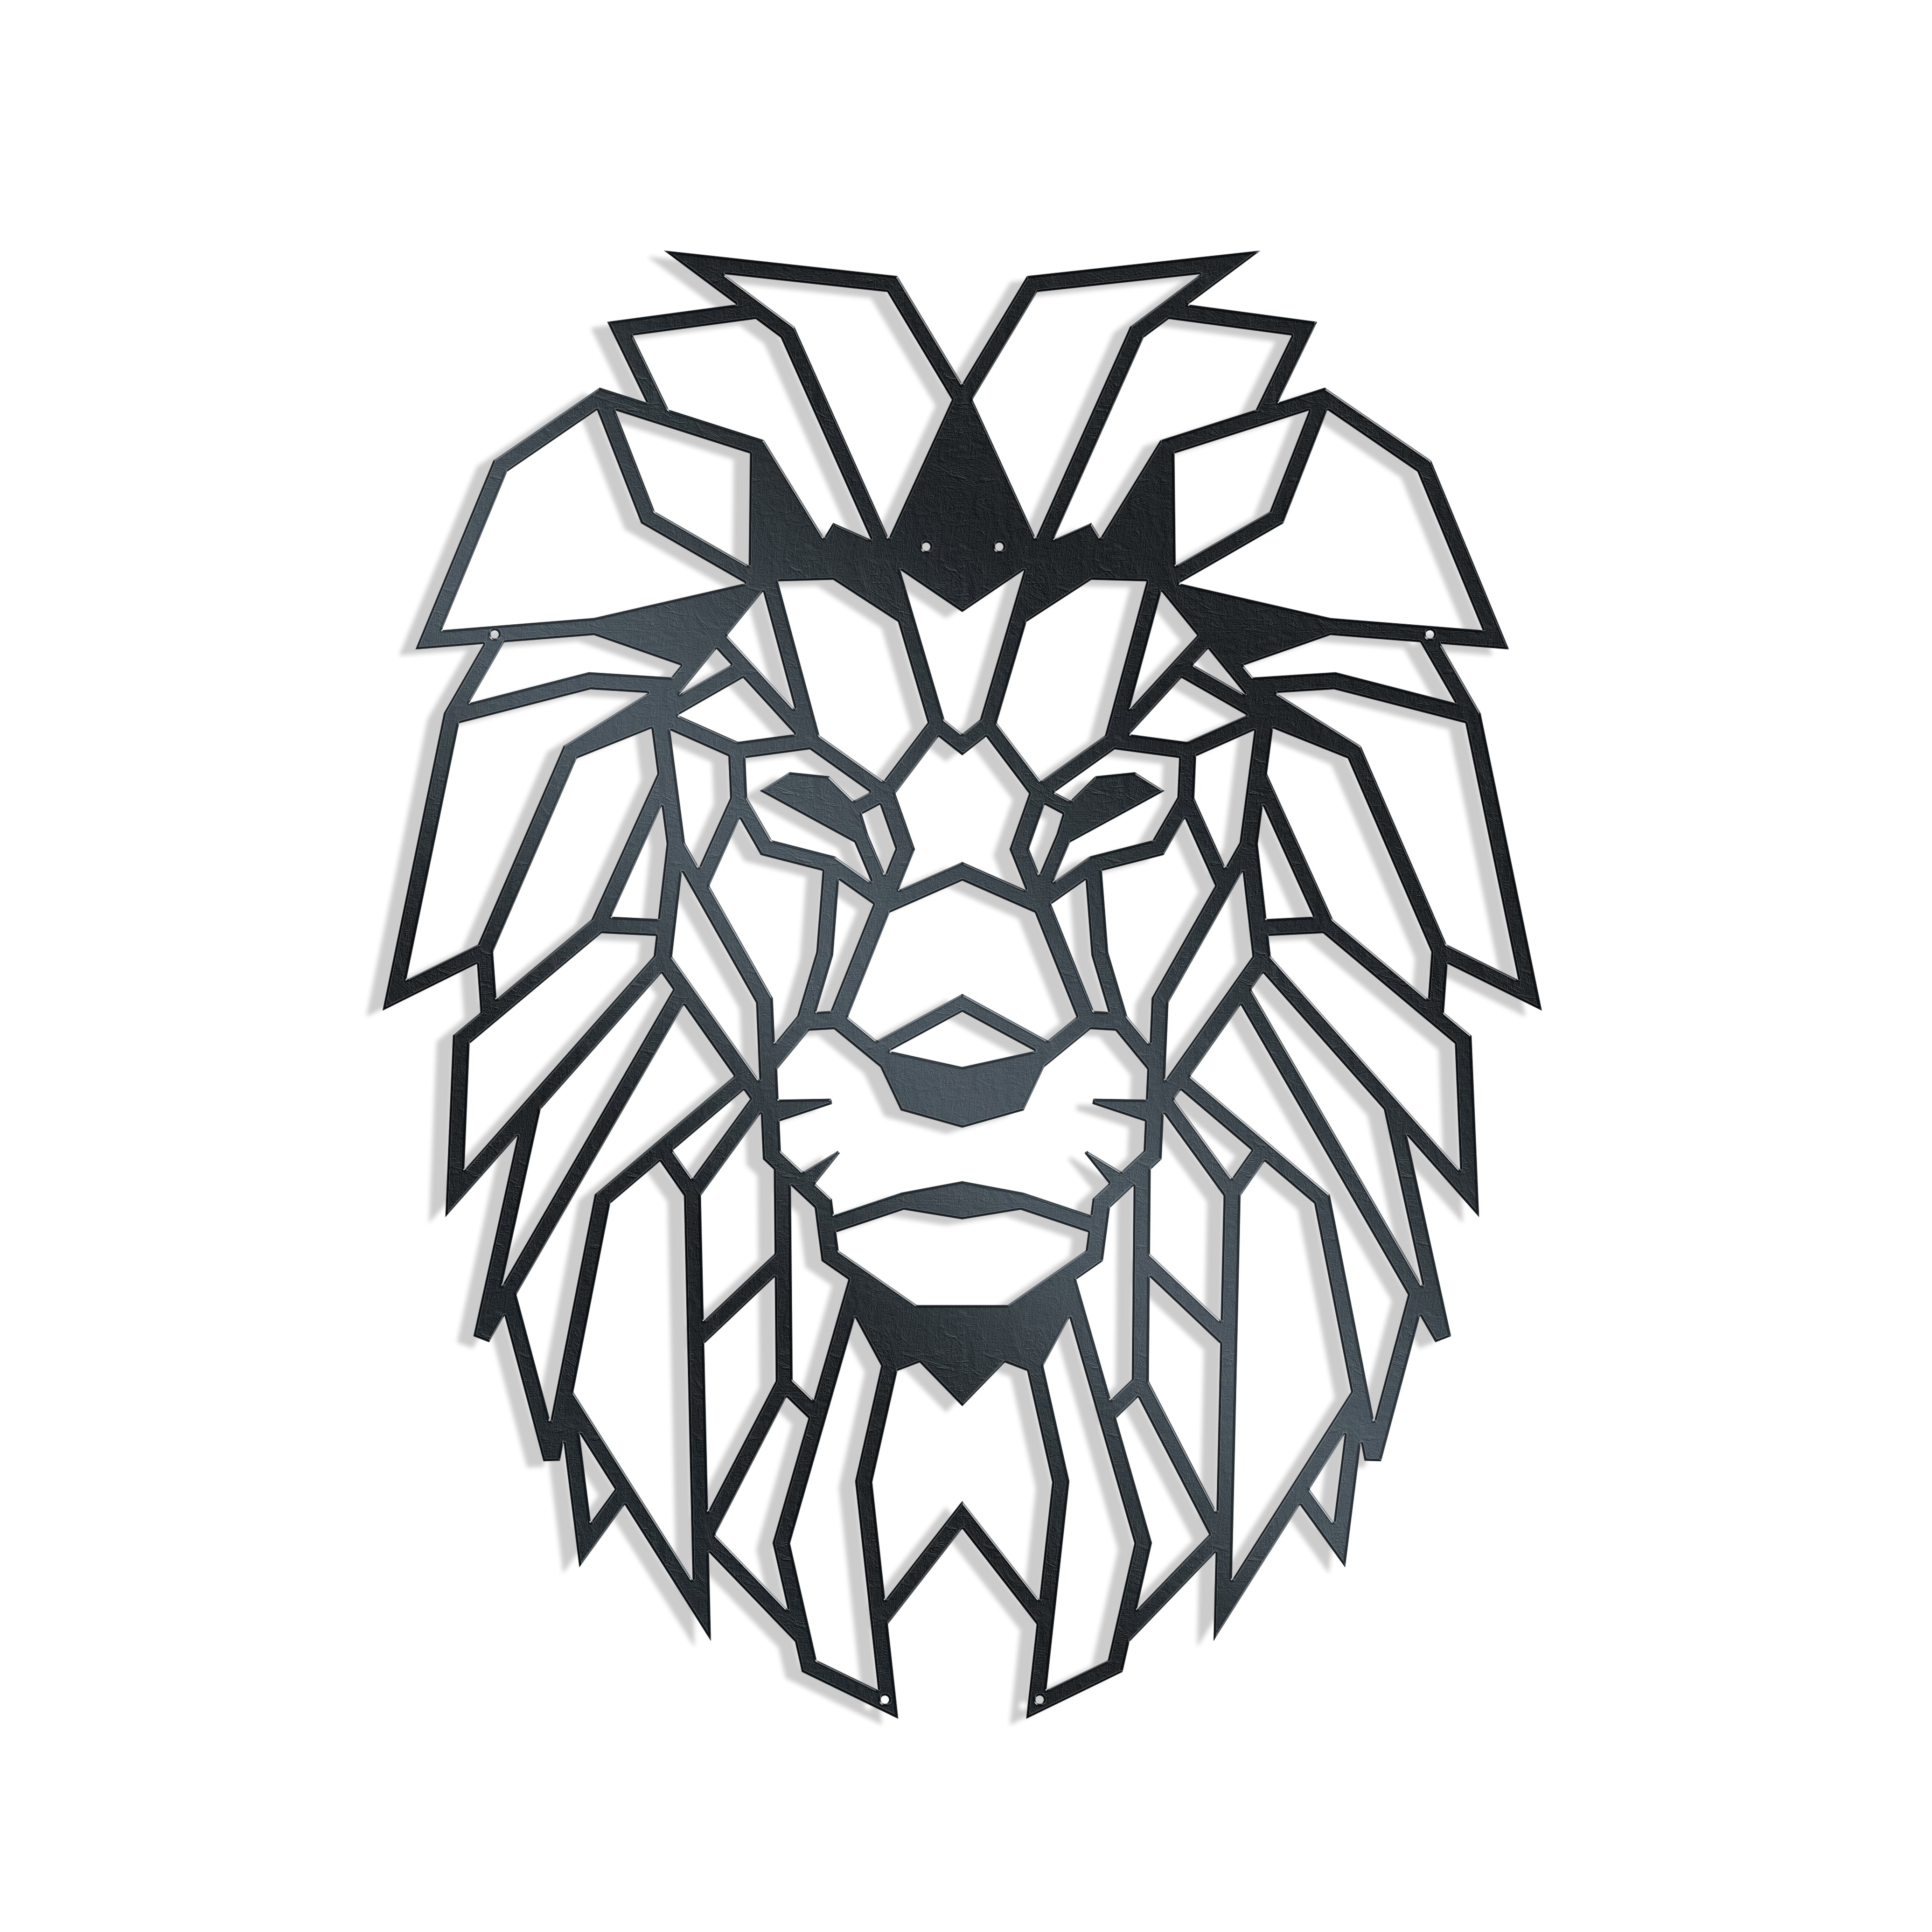 Metal wall art lion head. Geometric design shows off the proud nature of the lion in all its glory.